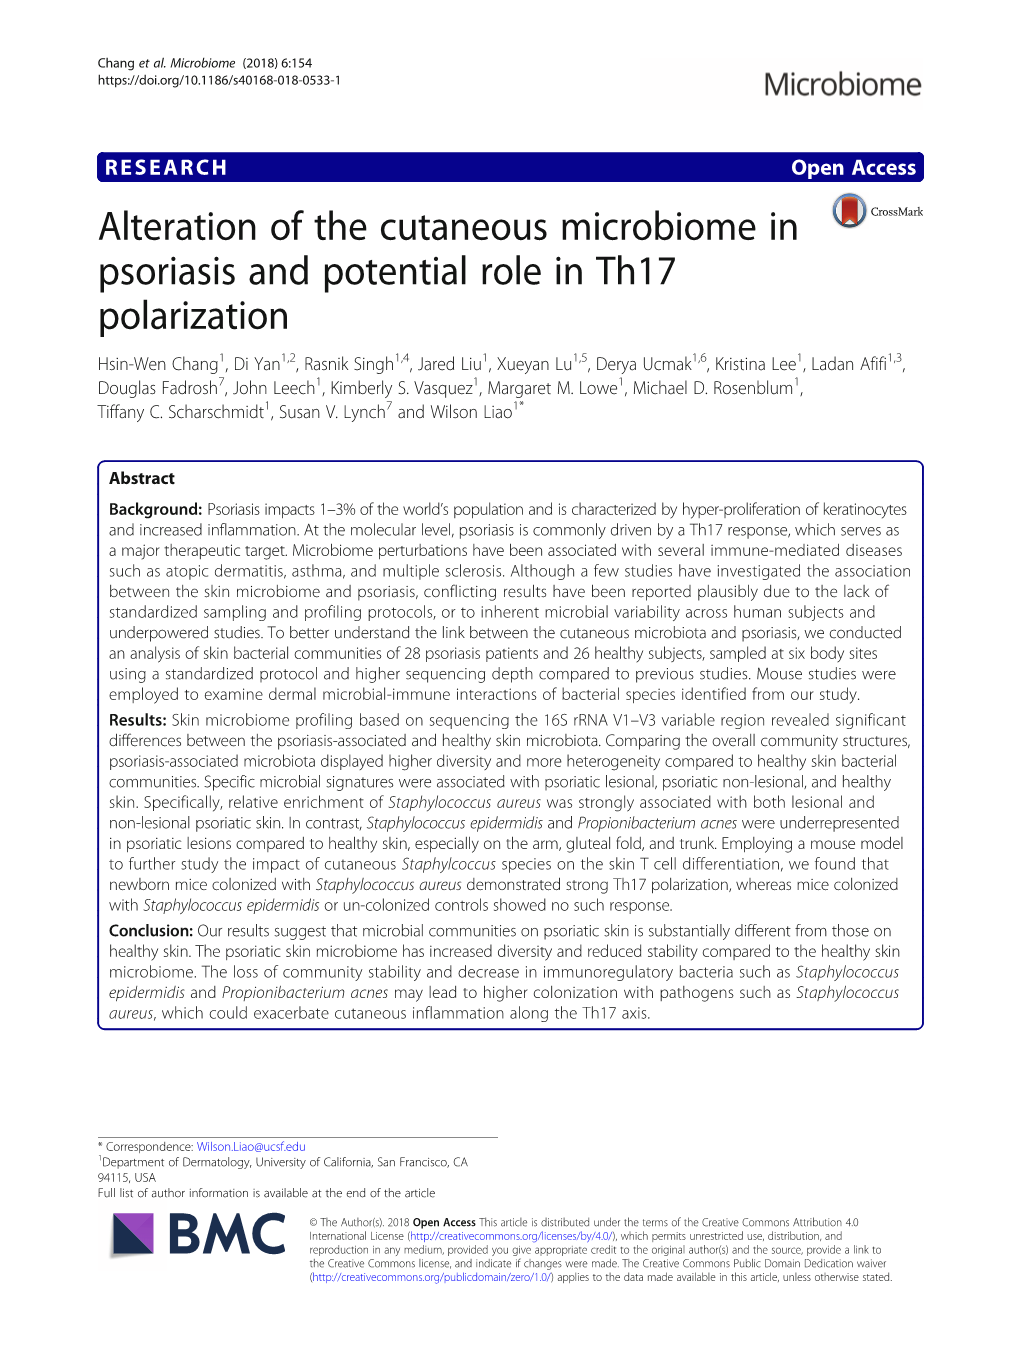 Alteration of the Cutaneous Microbiome in Psoriasis And